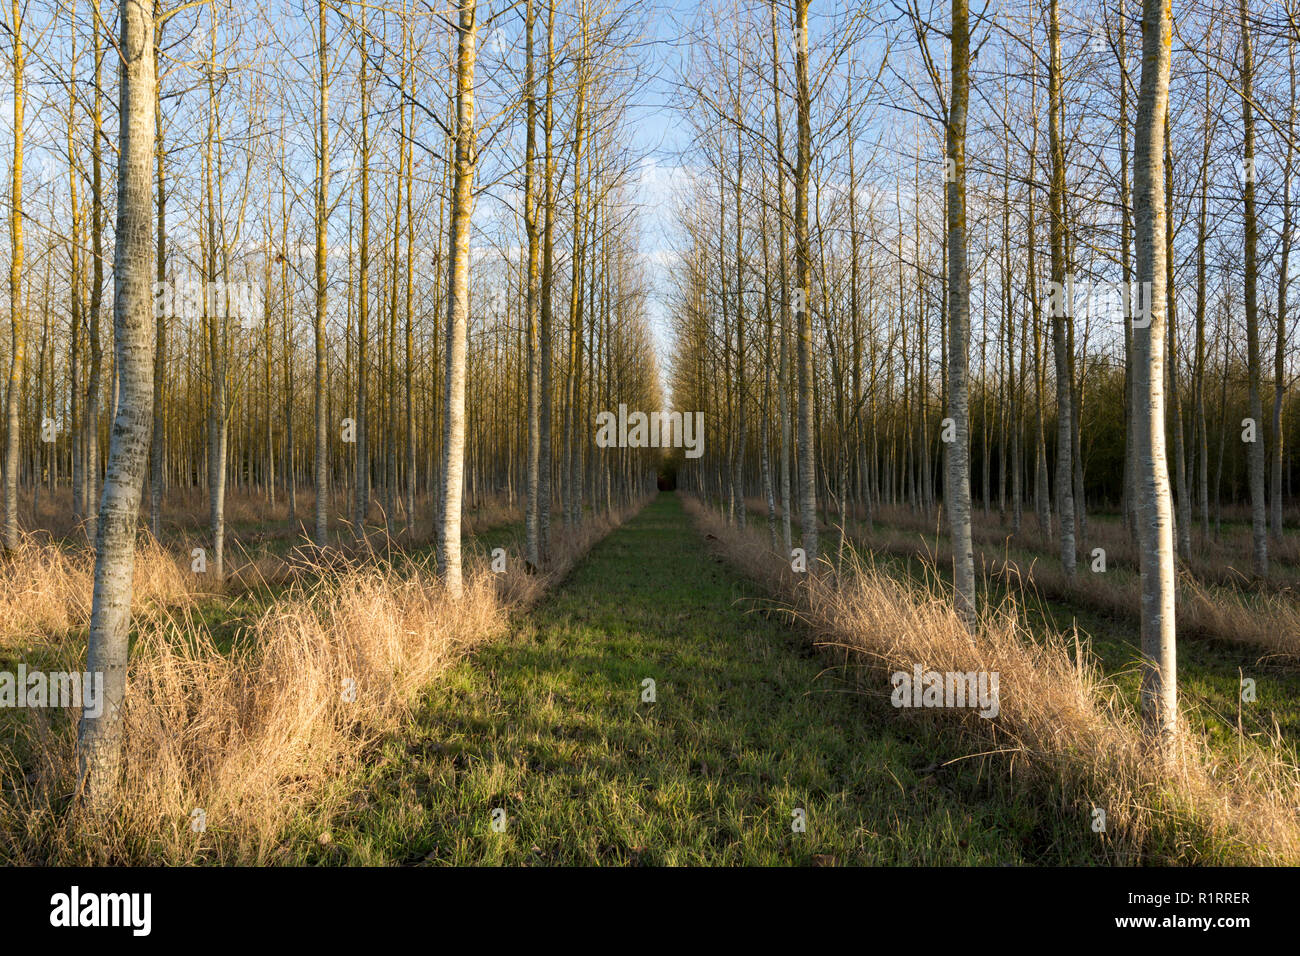 A plantation of poplars during winter in the village of Smarden, Kent, UK. Stock Photo